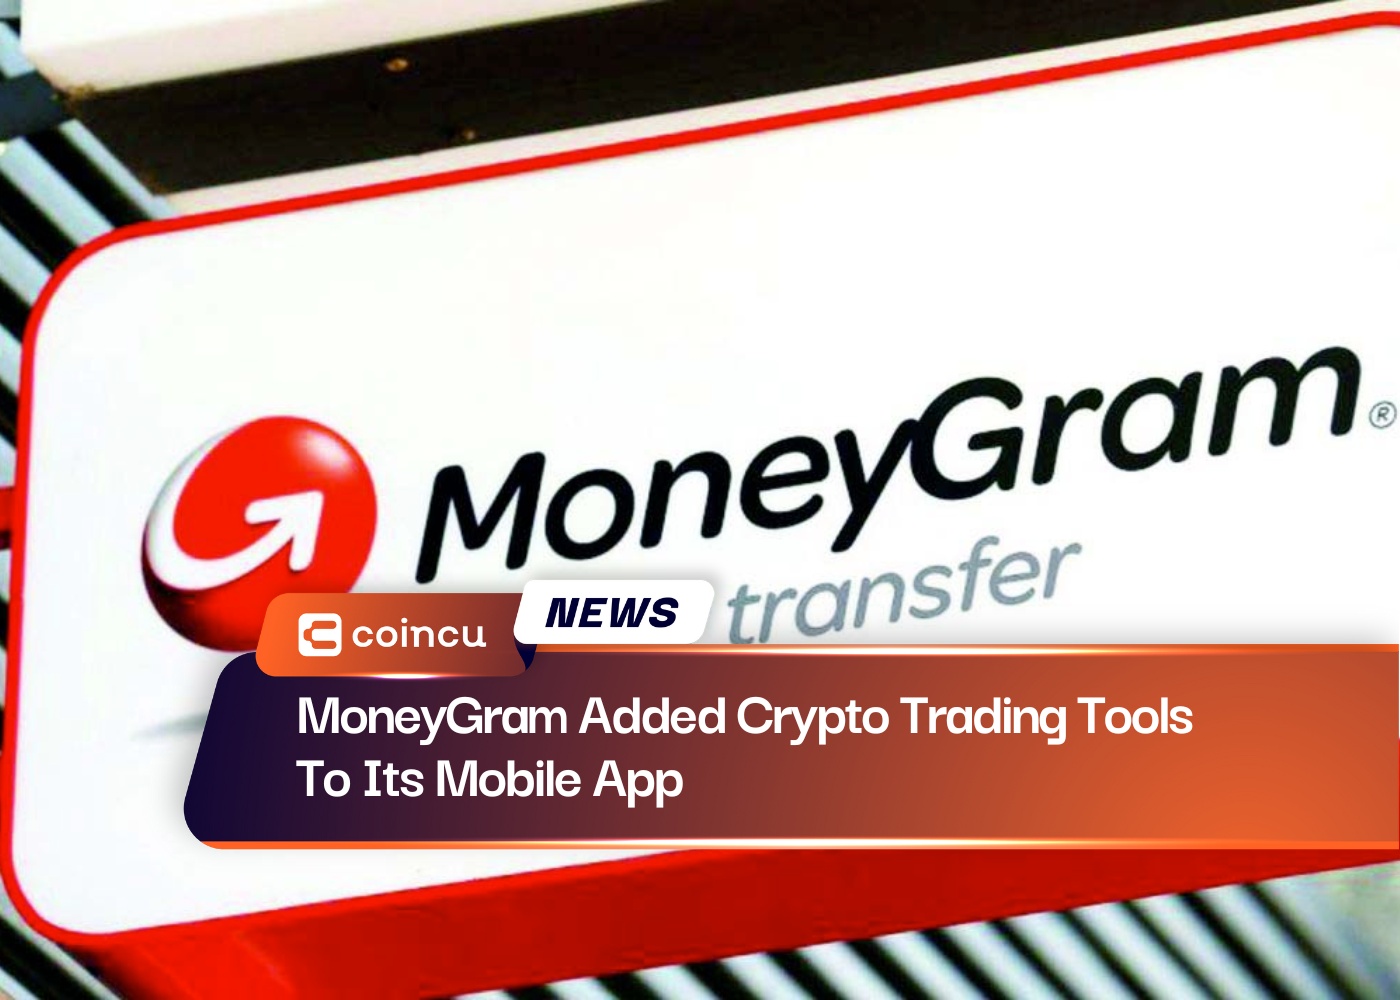 MoneyGram Added Crypto Trading Tools To Its Mobile App